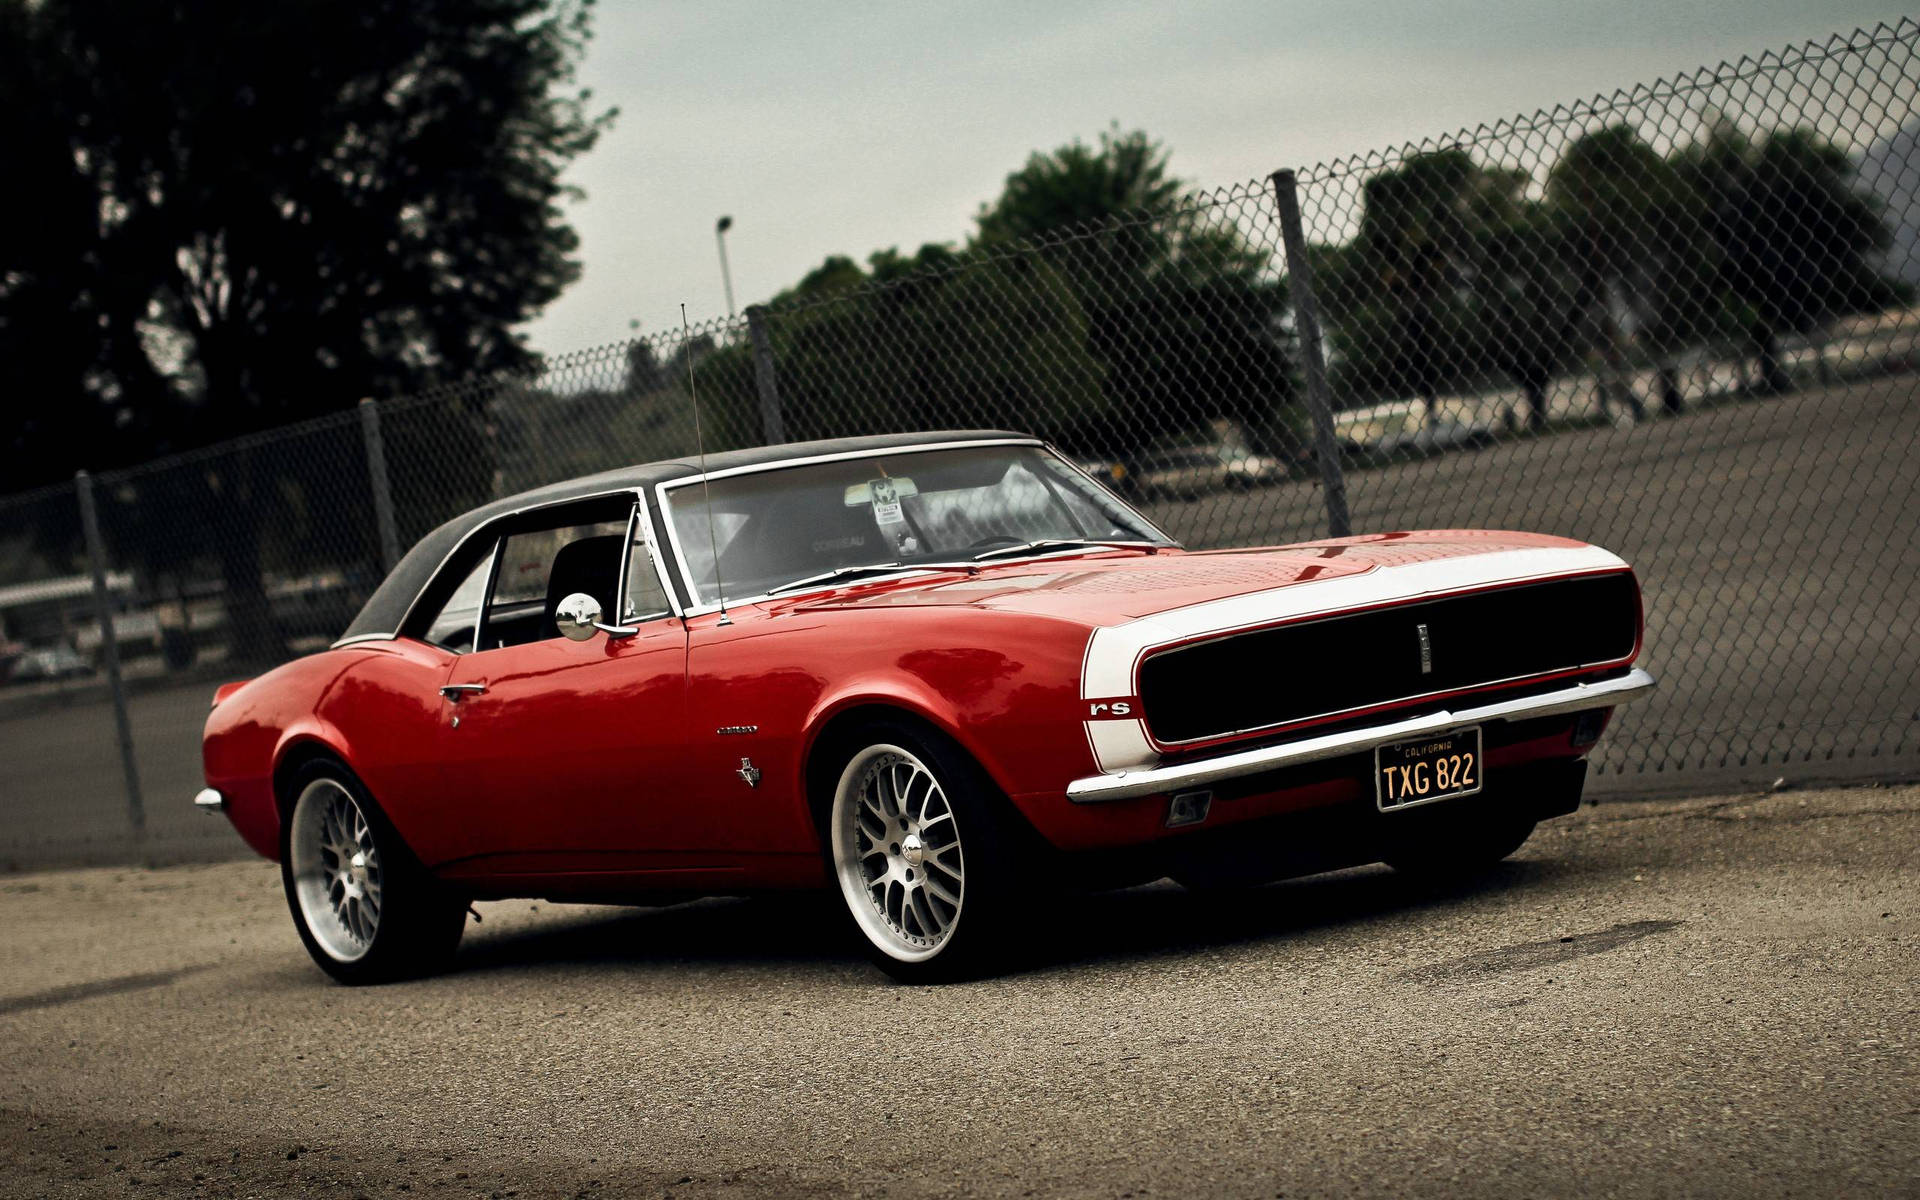 American Muscle Car With Black Top